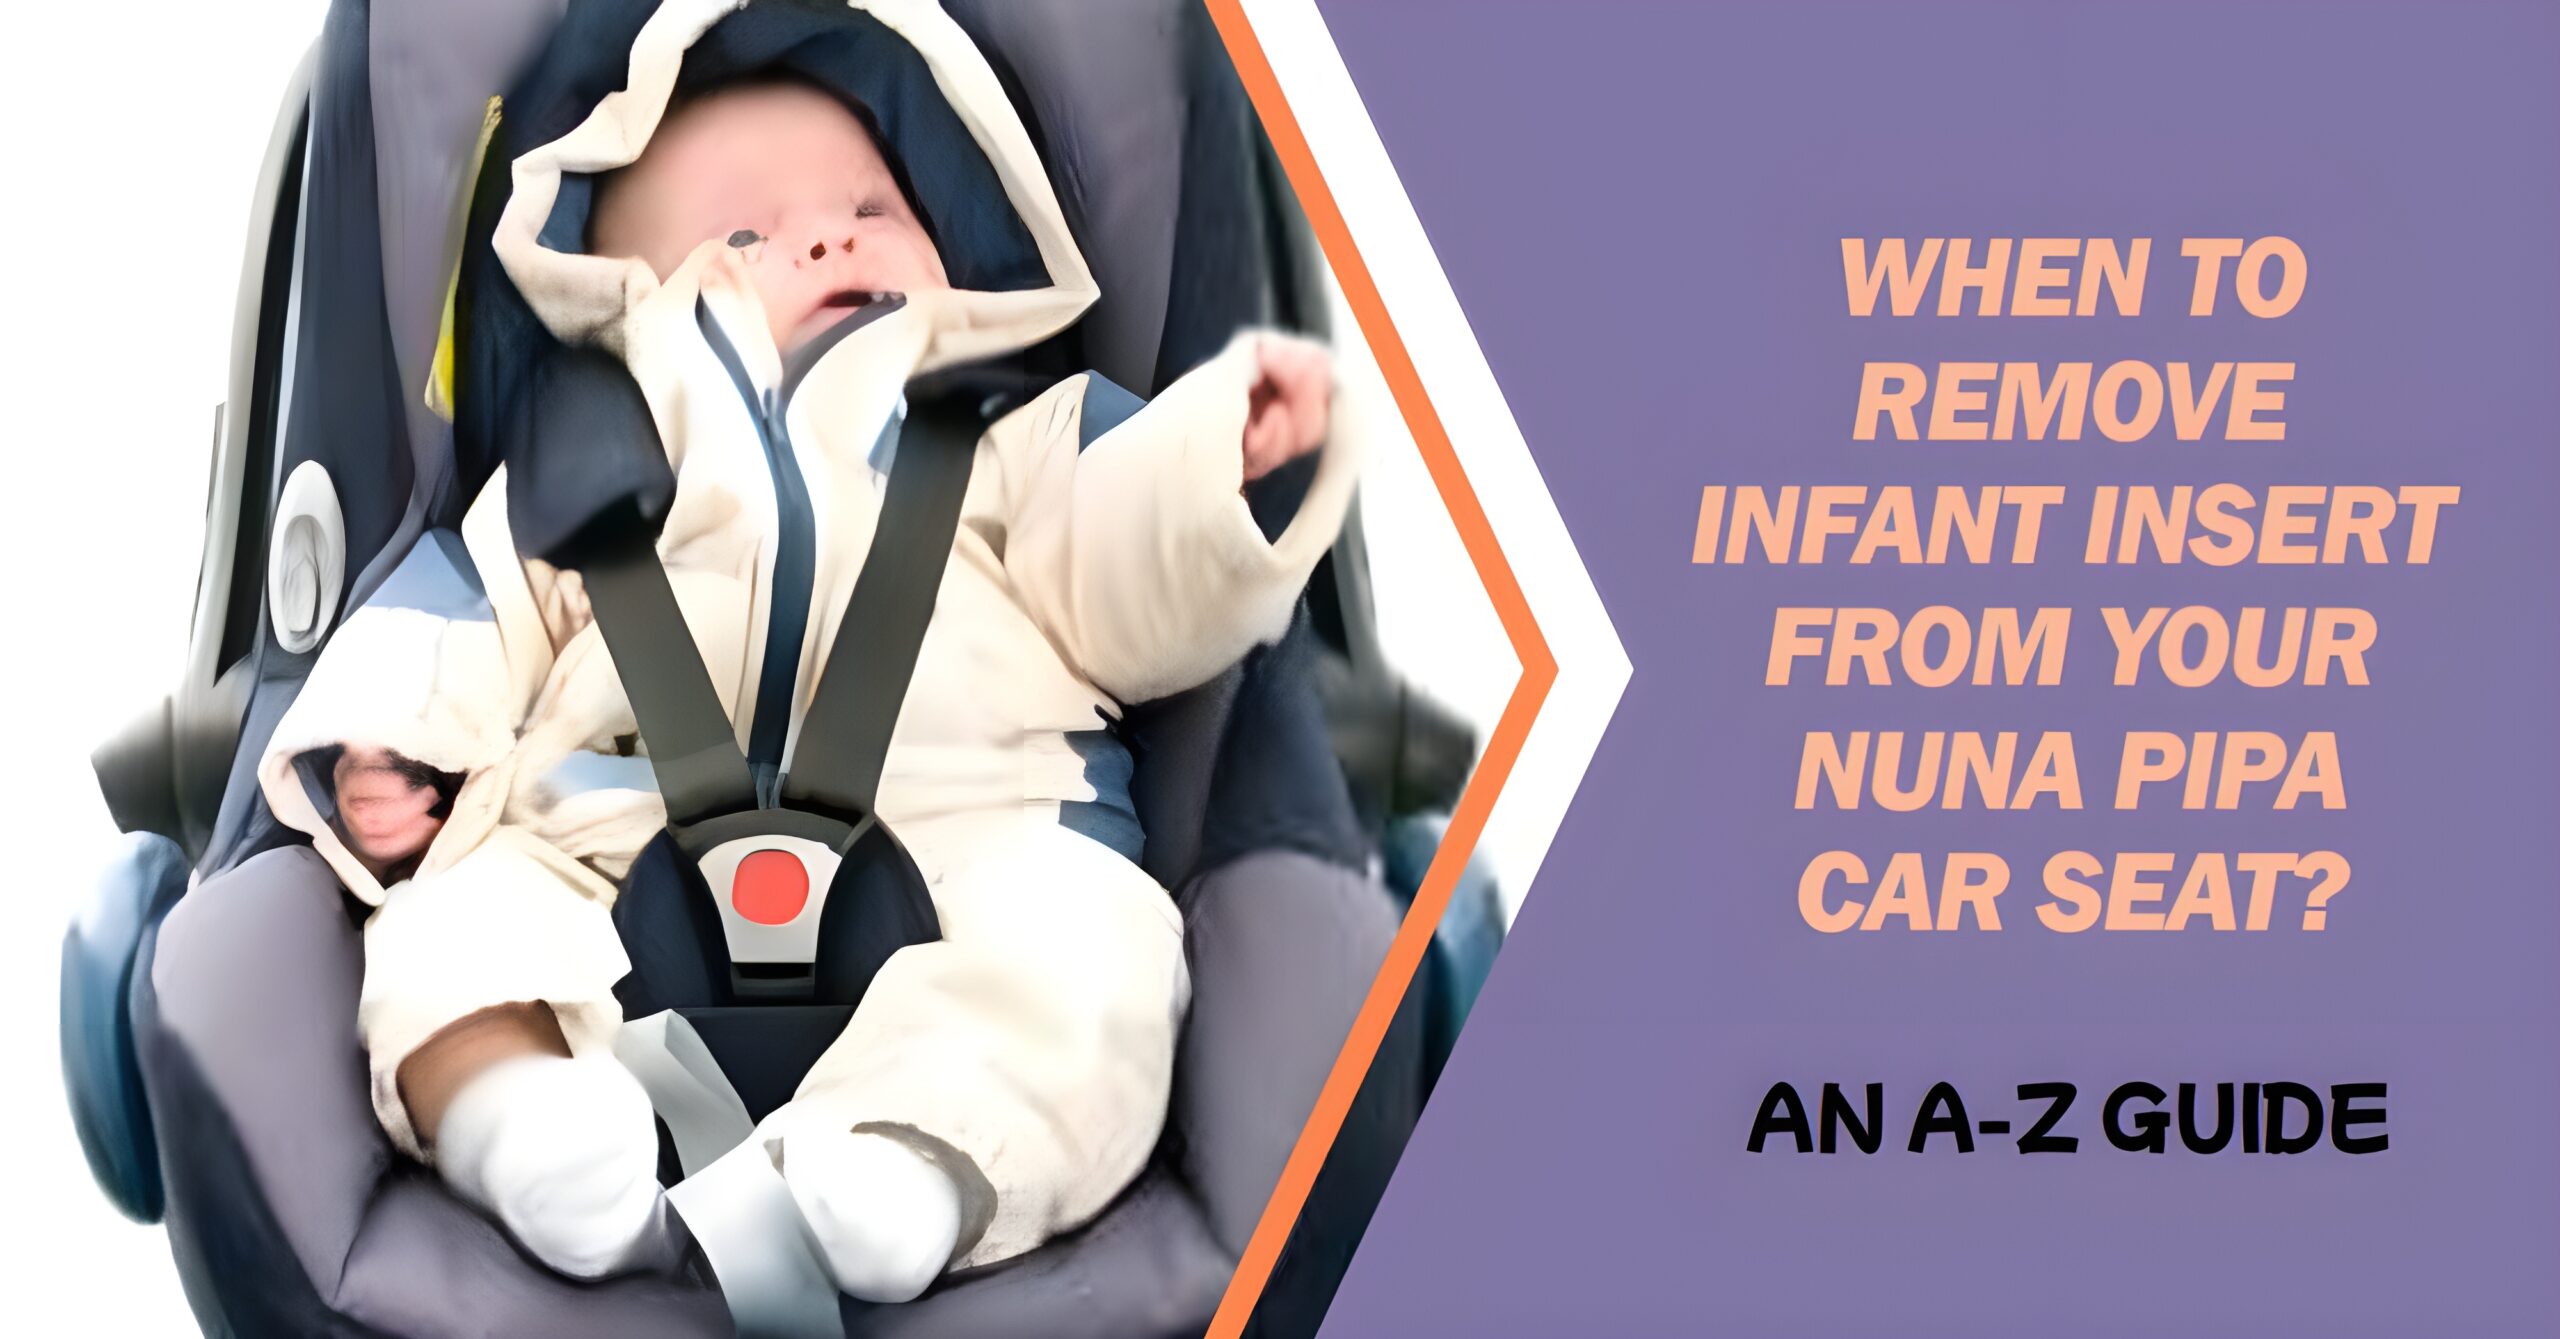 When to Remove Infant Insert from your Nuna Pipa?